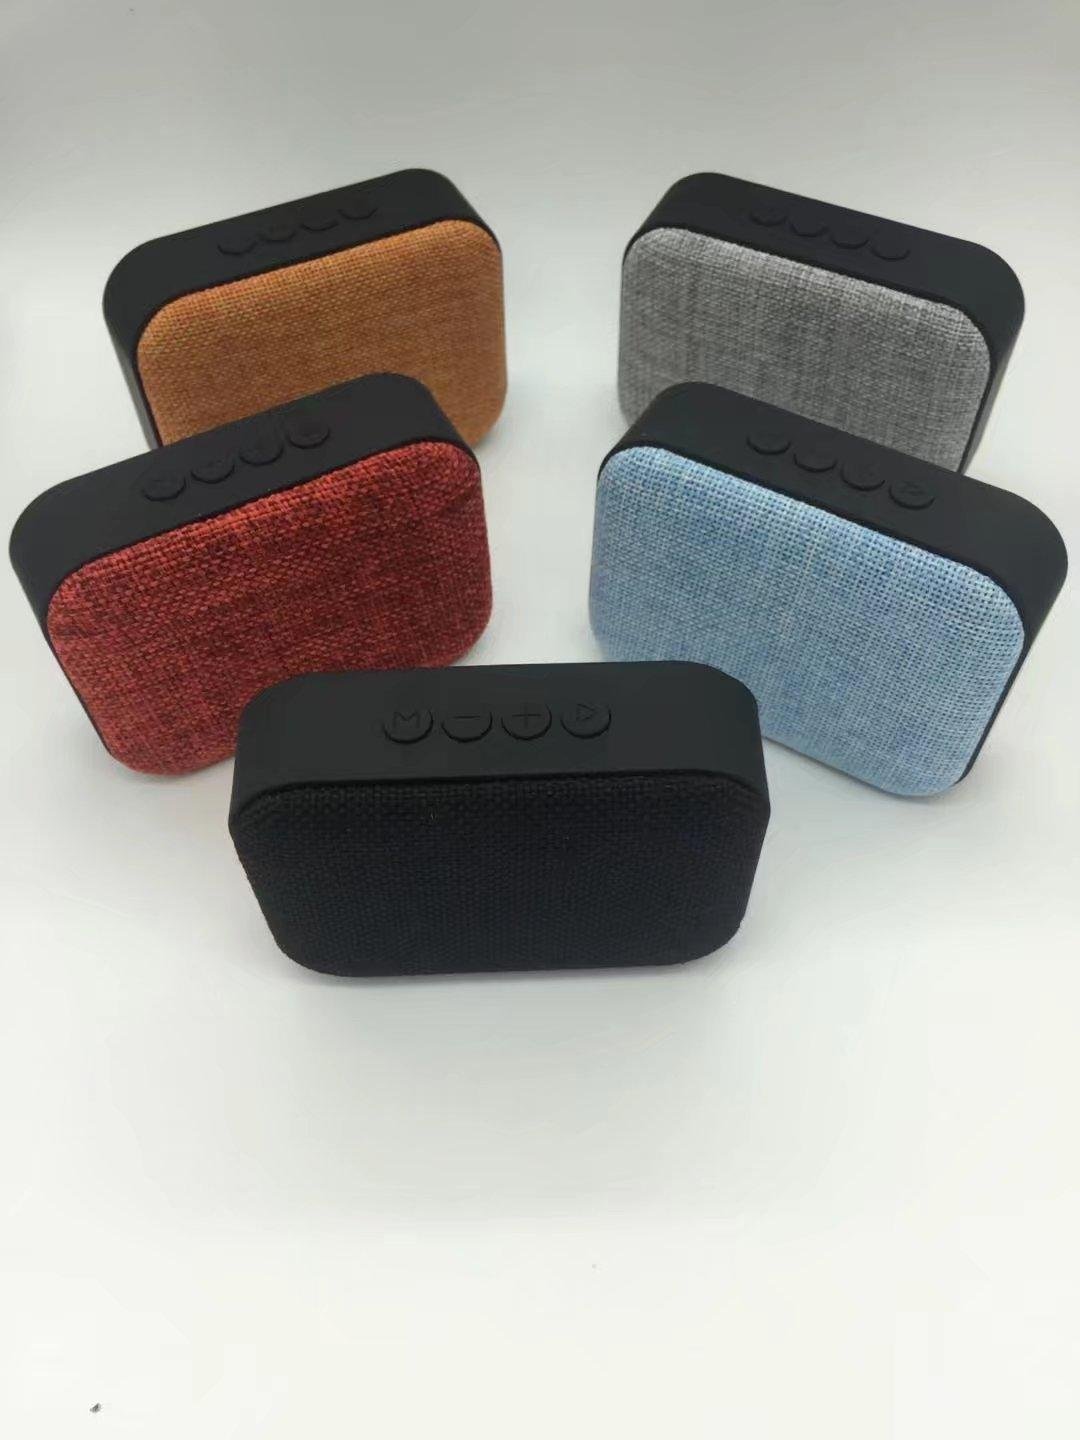 Cheap Bluetooth speaker with fabric shell 